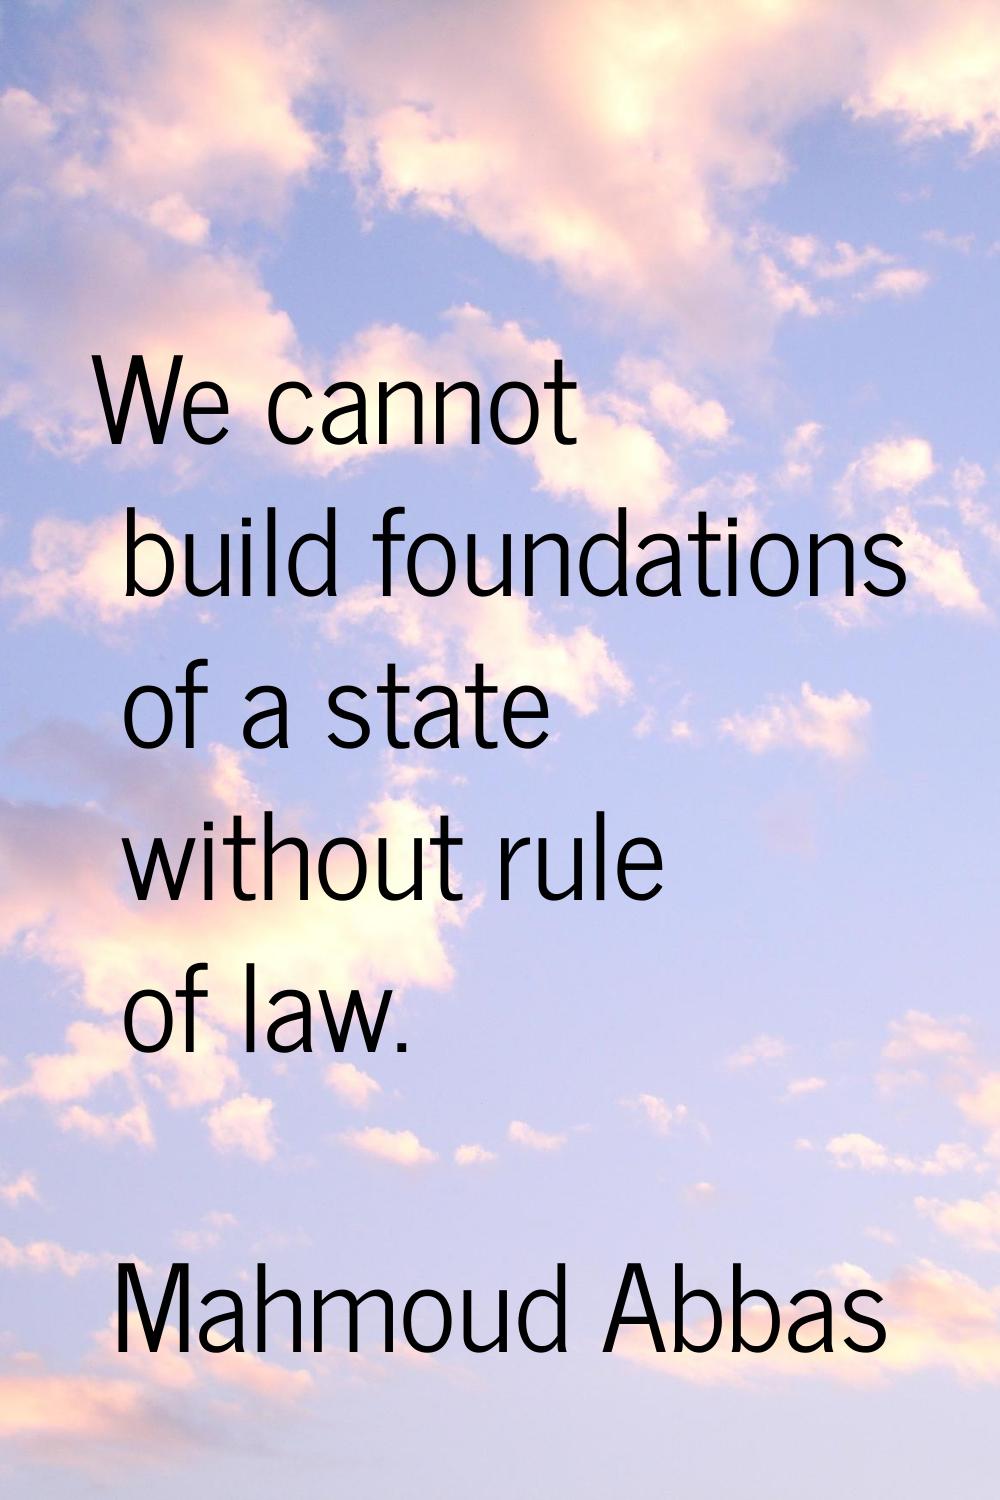 We cannot build foundations of a state without rule of law.